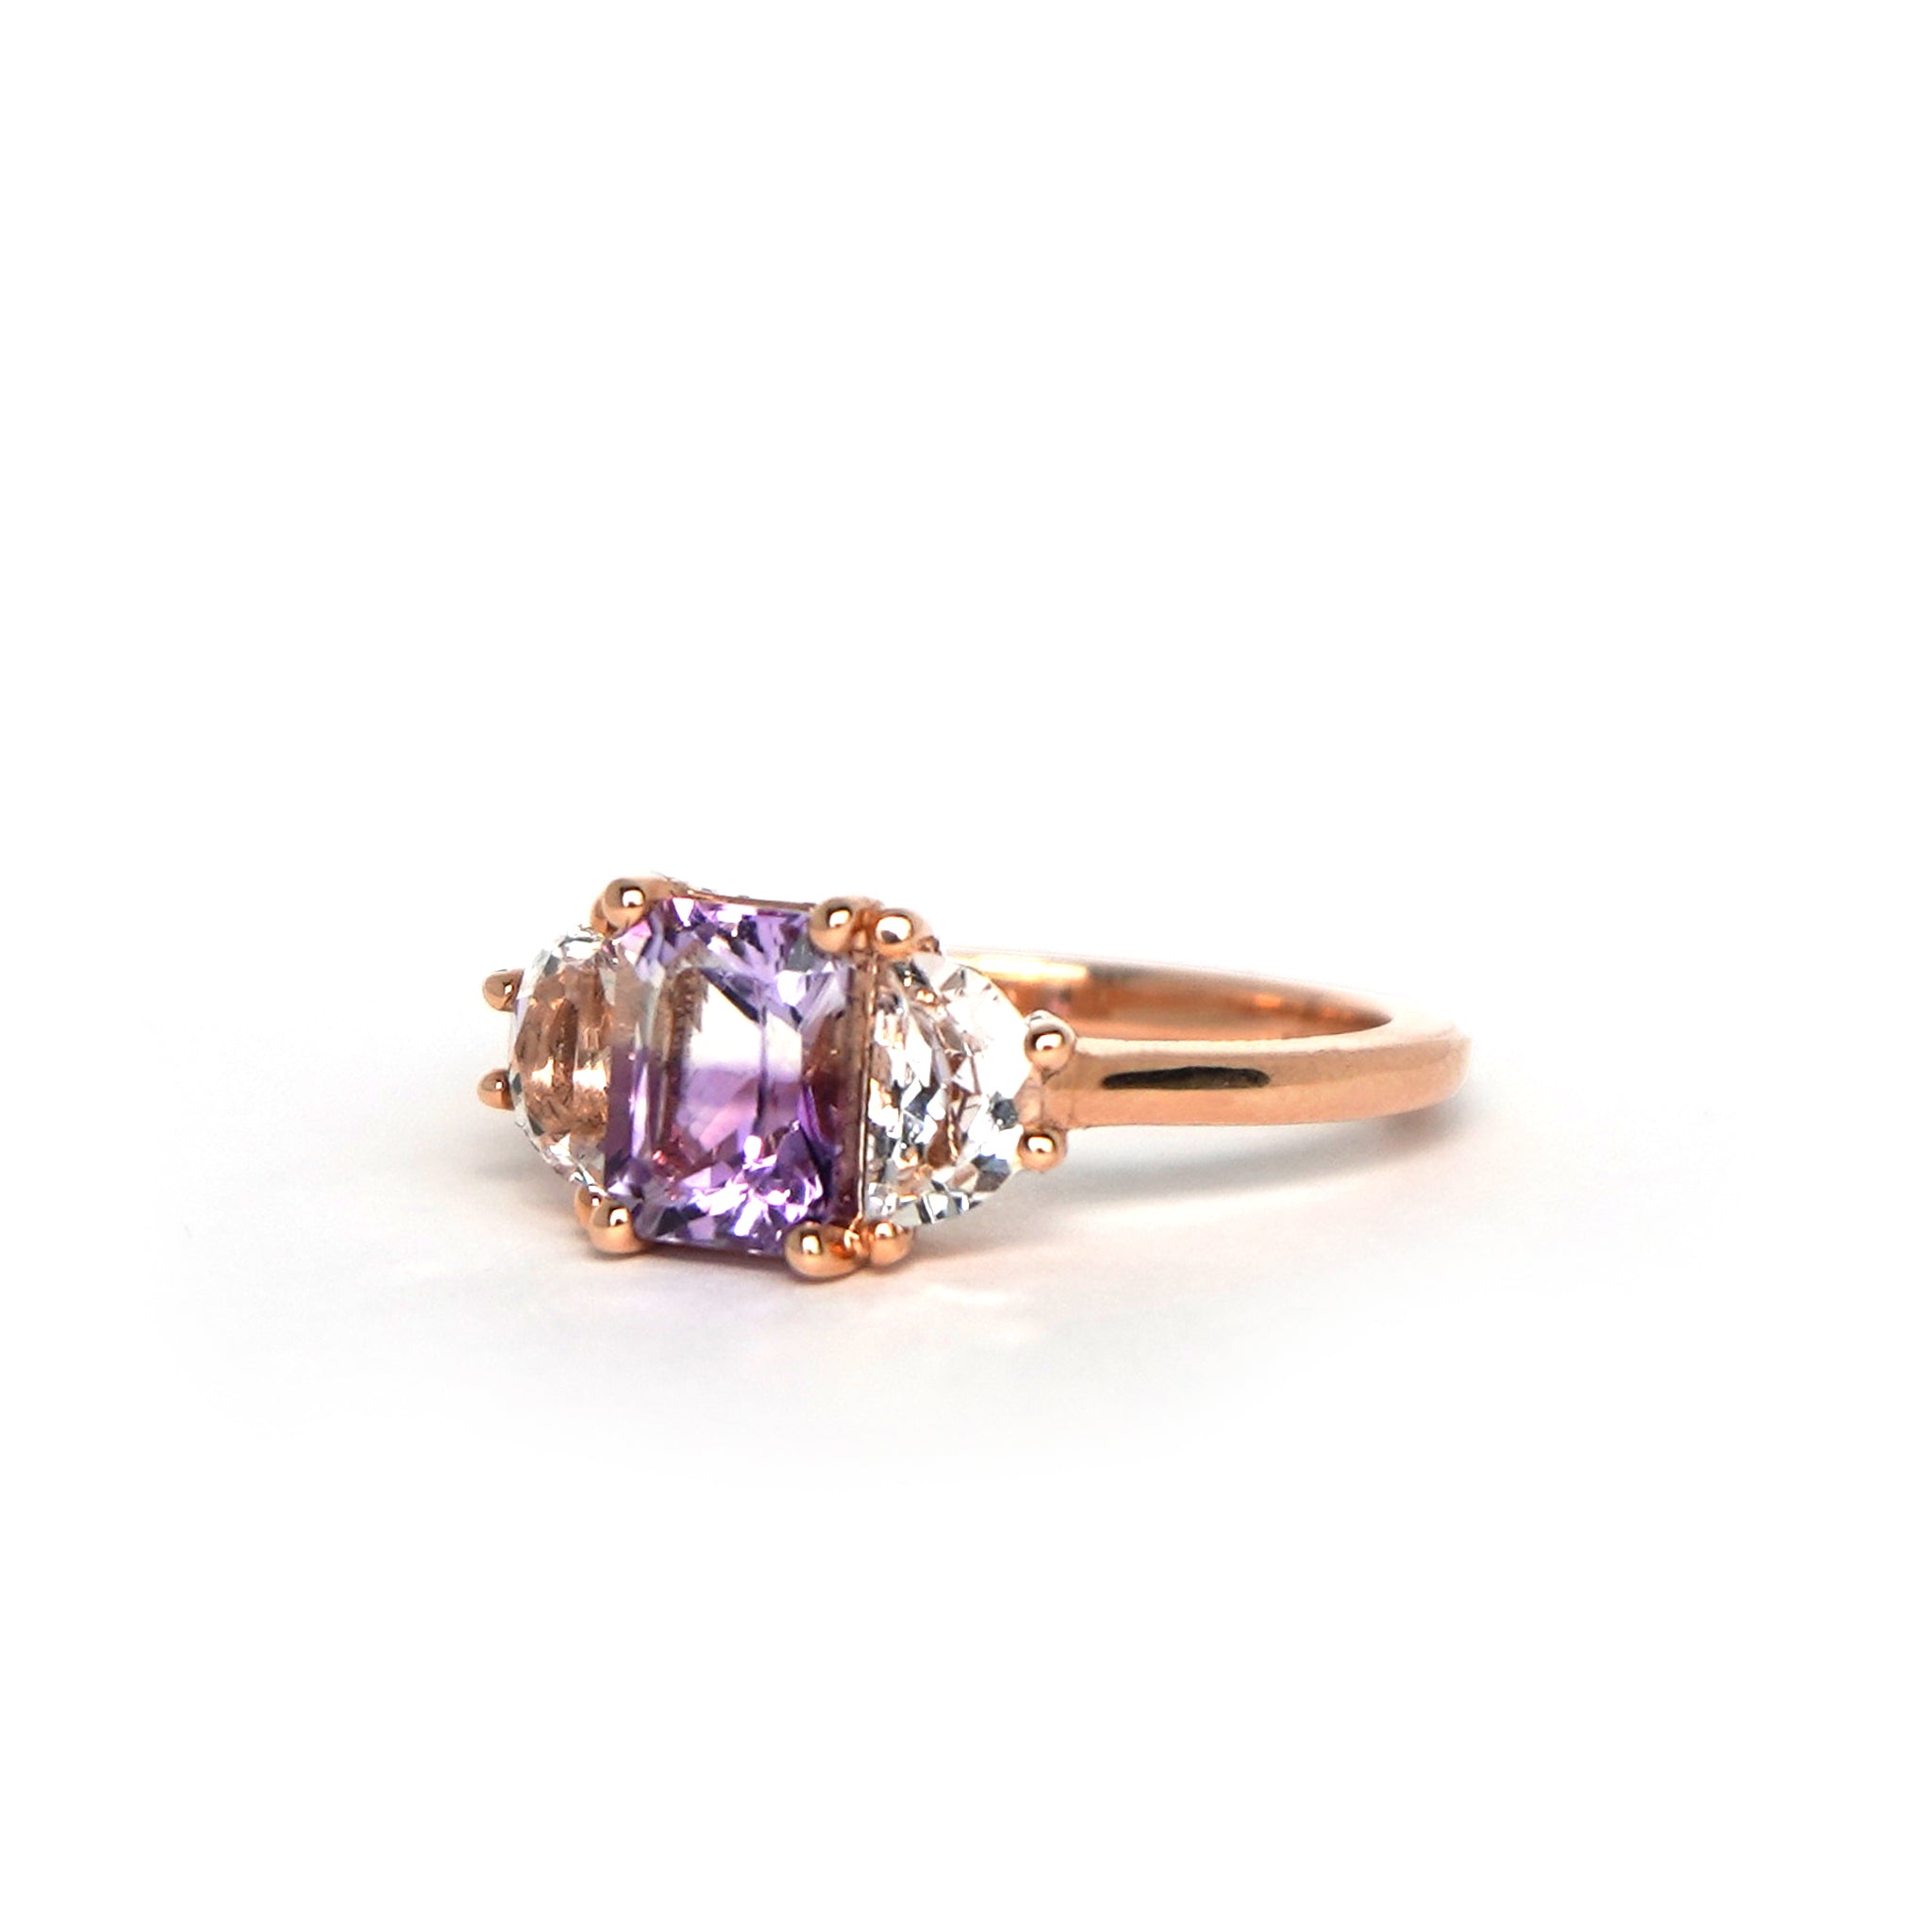 Side view of the Lilac Roots ring showcasing the natural bi-color amethyst and half-moon white topaz stones in rose gold. Custom order now.